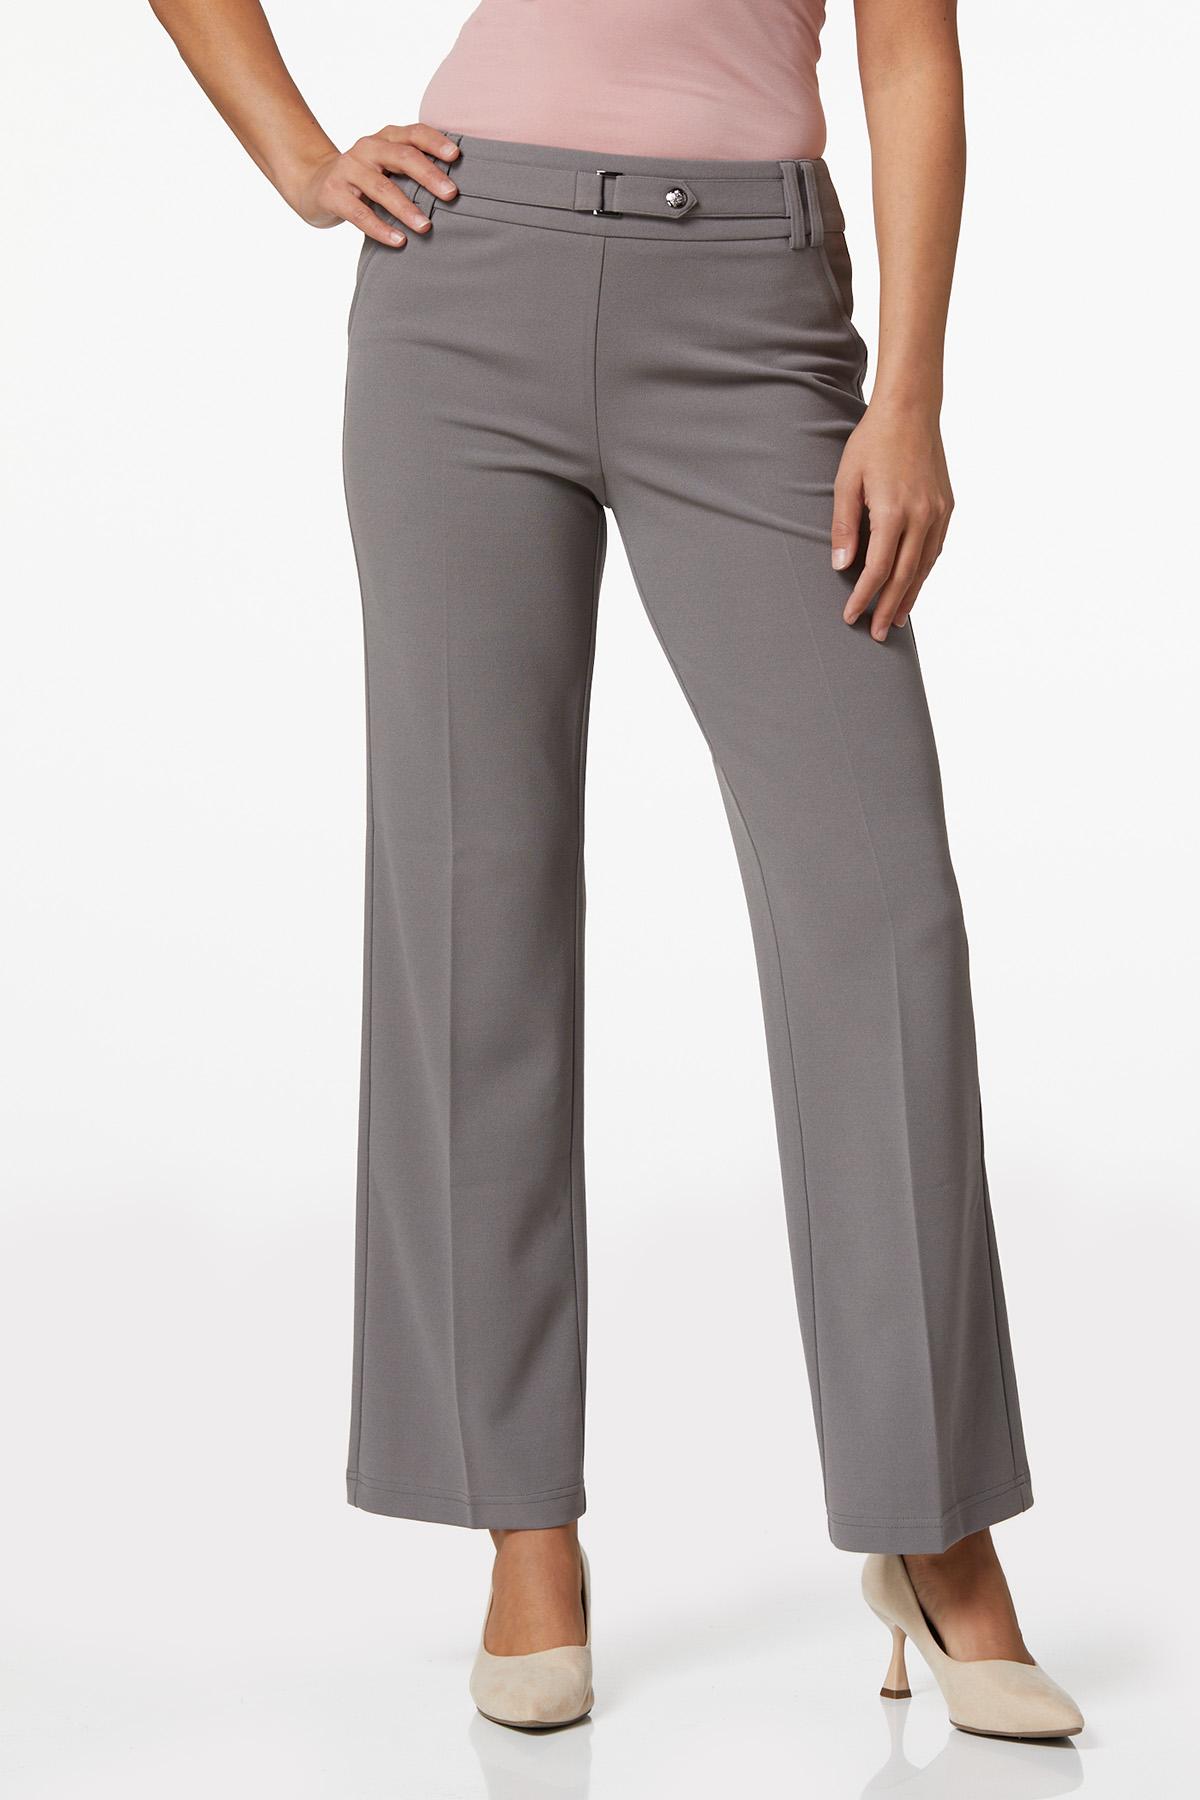 Cato Fashions  Cato Belted Trouser Pants